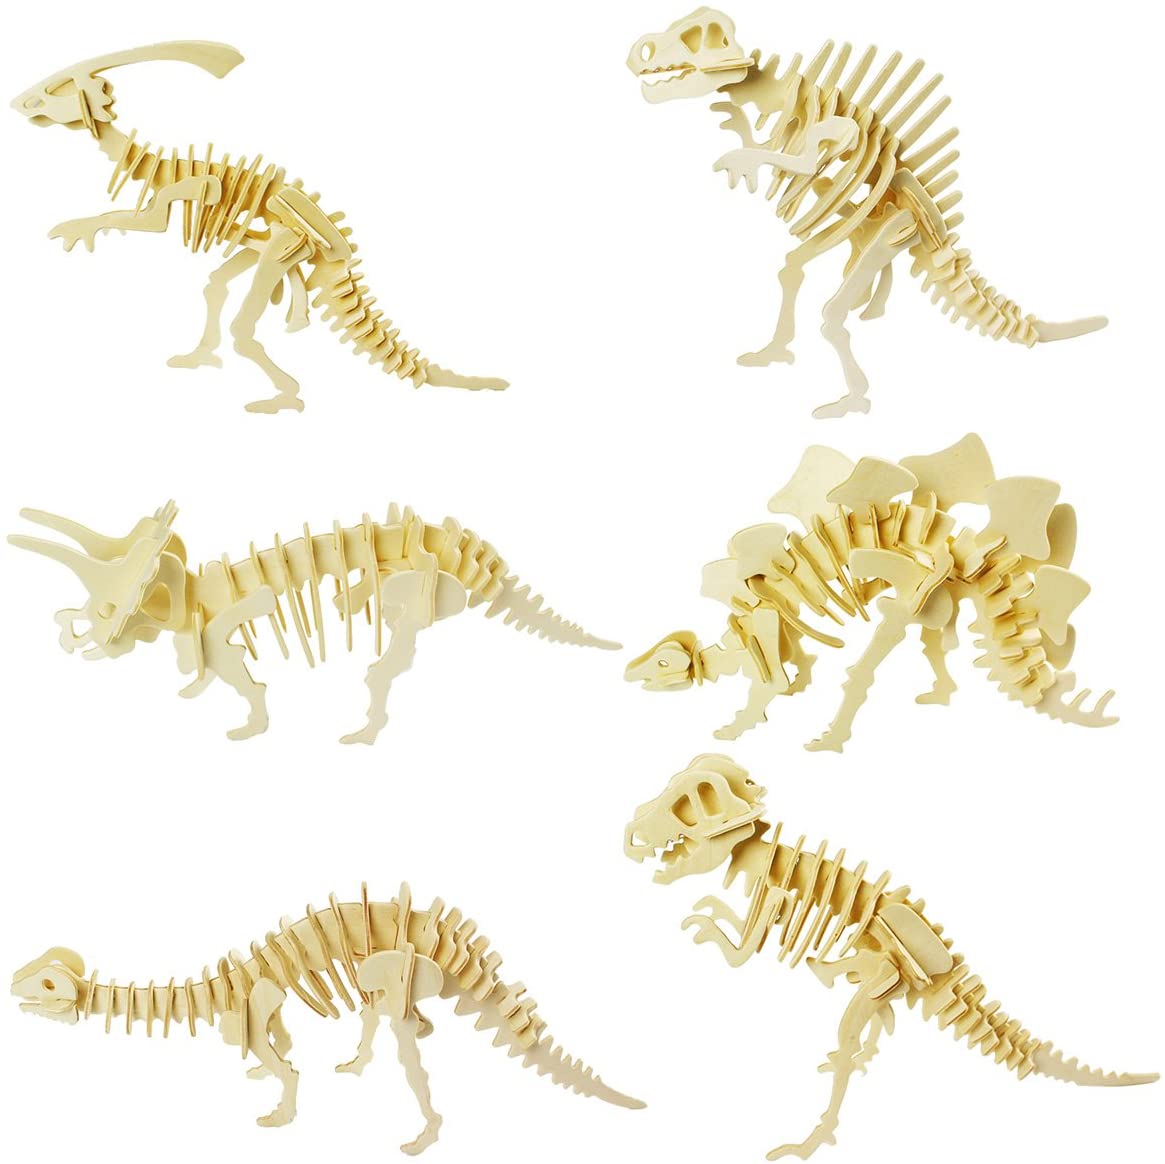 calary 3D Wooden Puzzle Simulation Animal Dinosaur Assembly DIY Model Toy  for